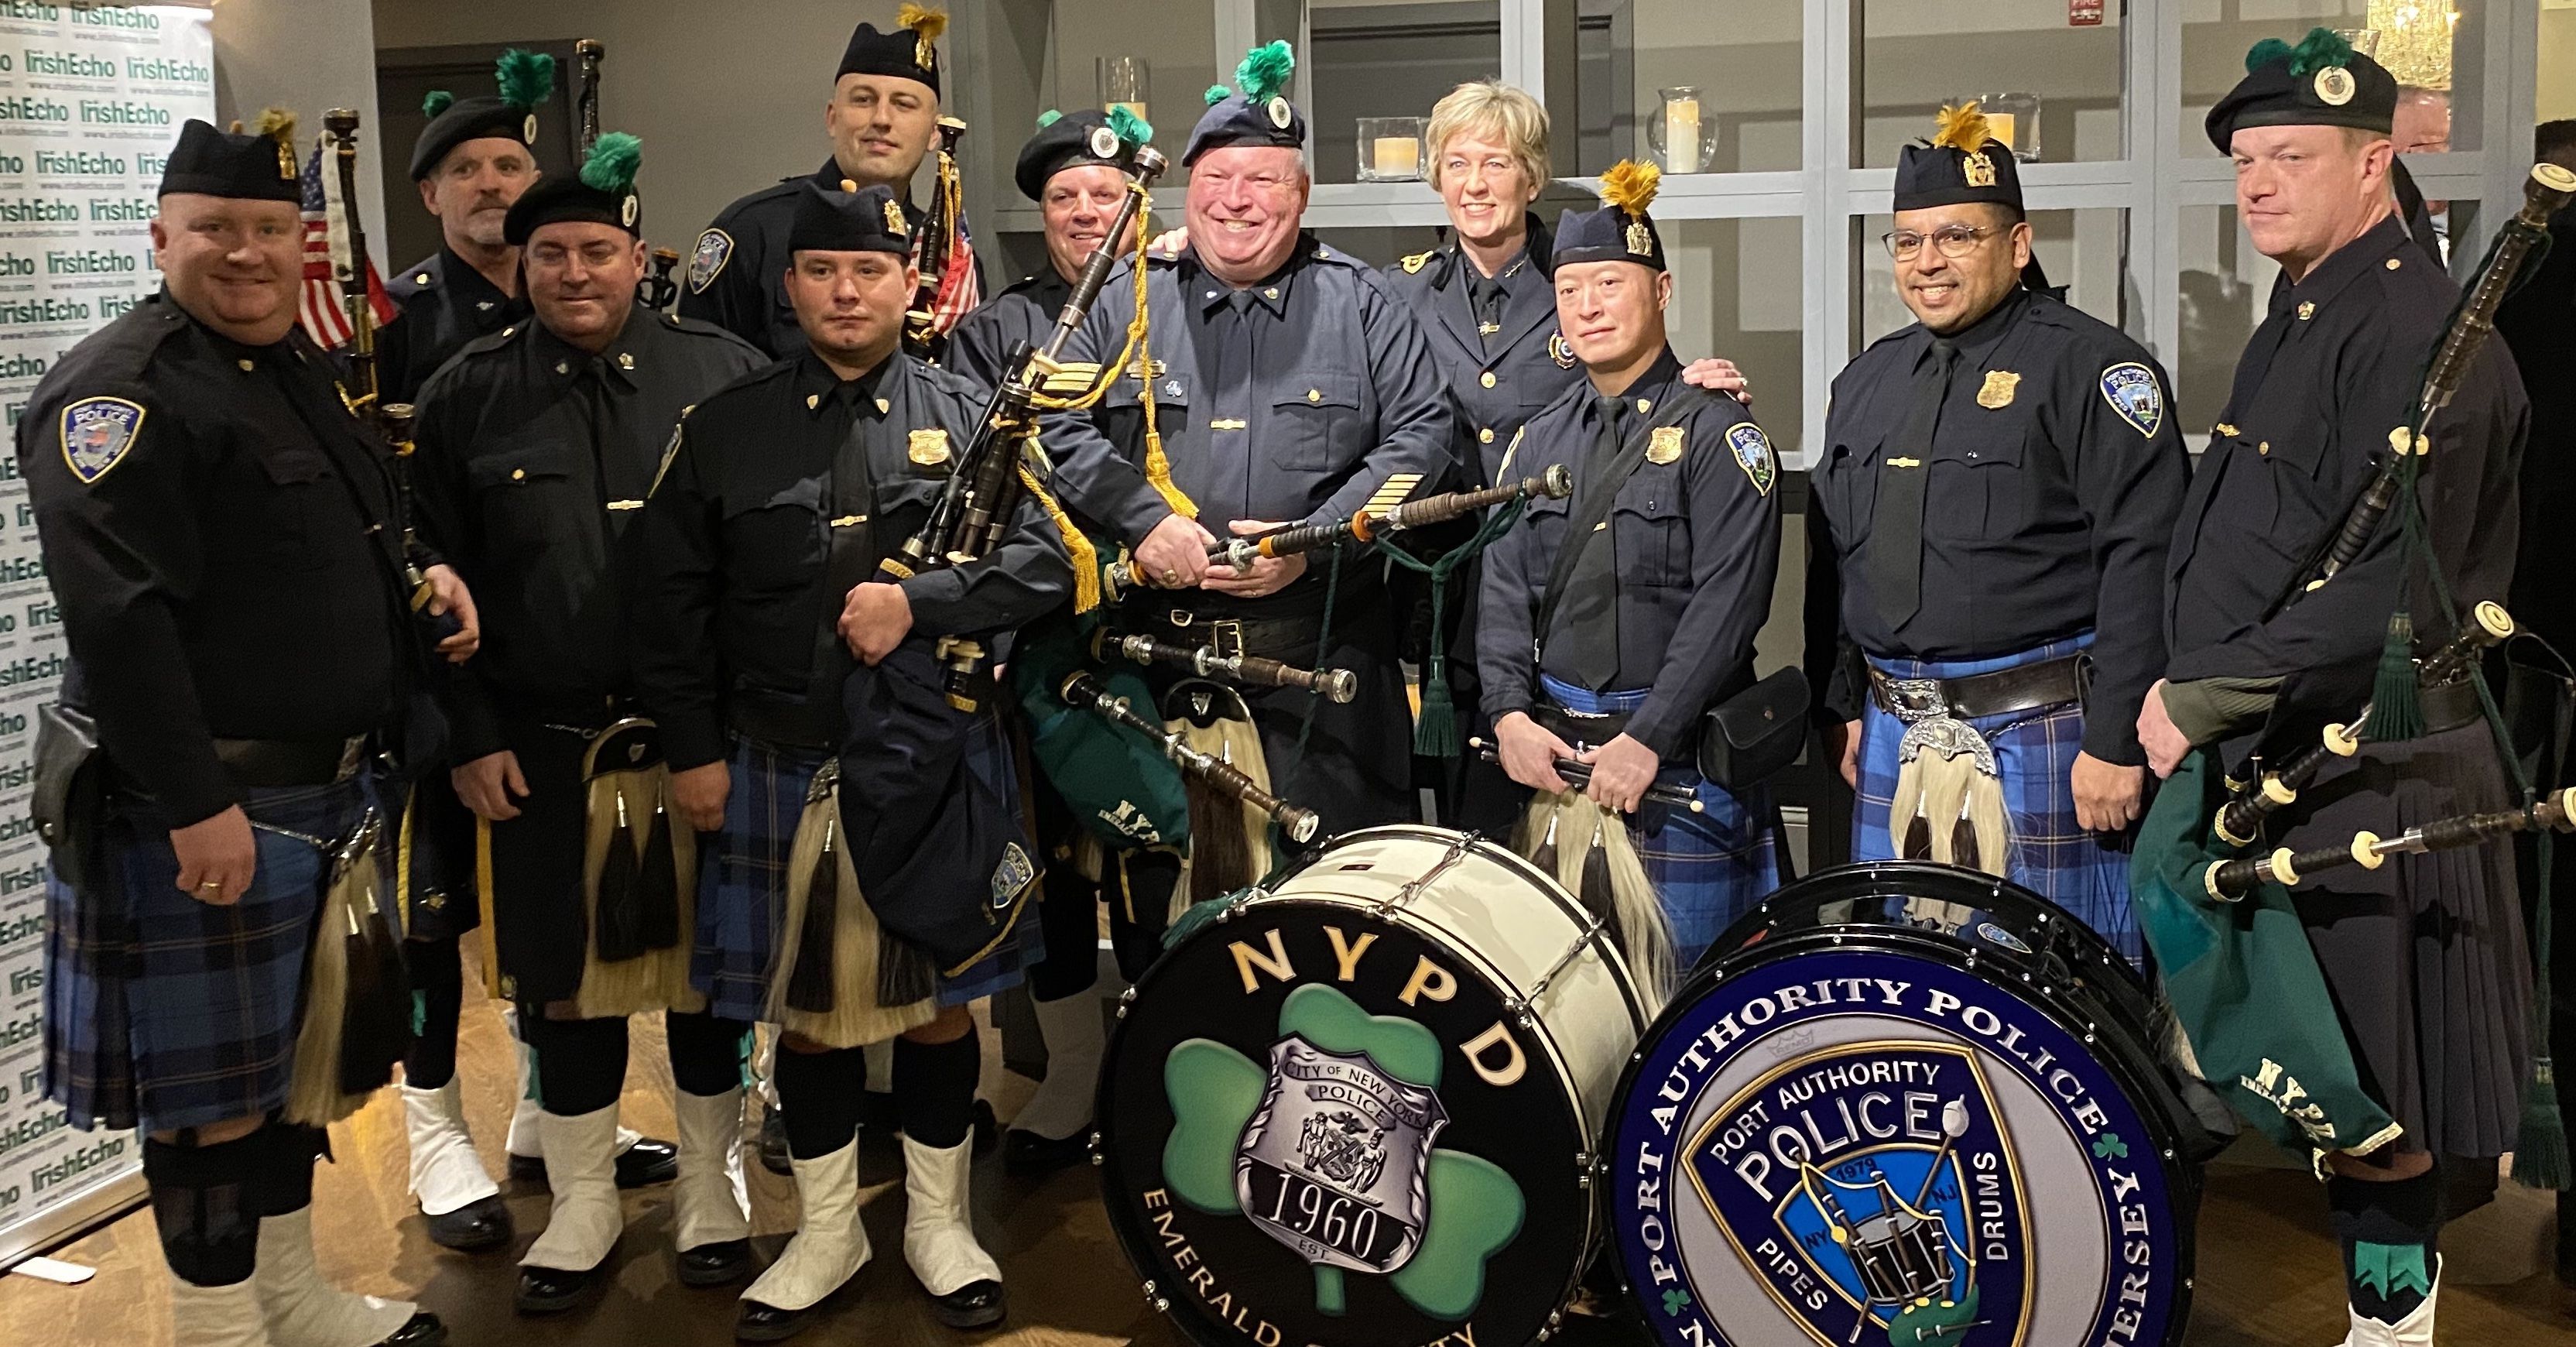 Nypdpipe drums